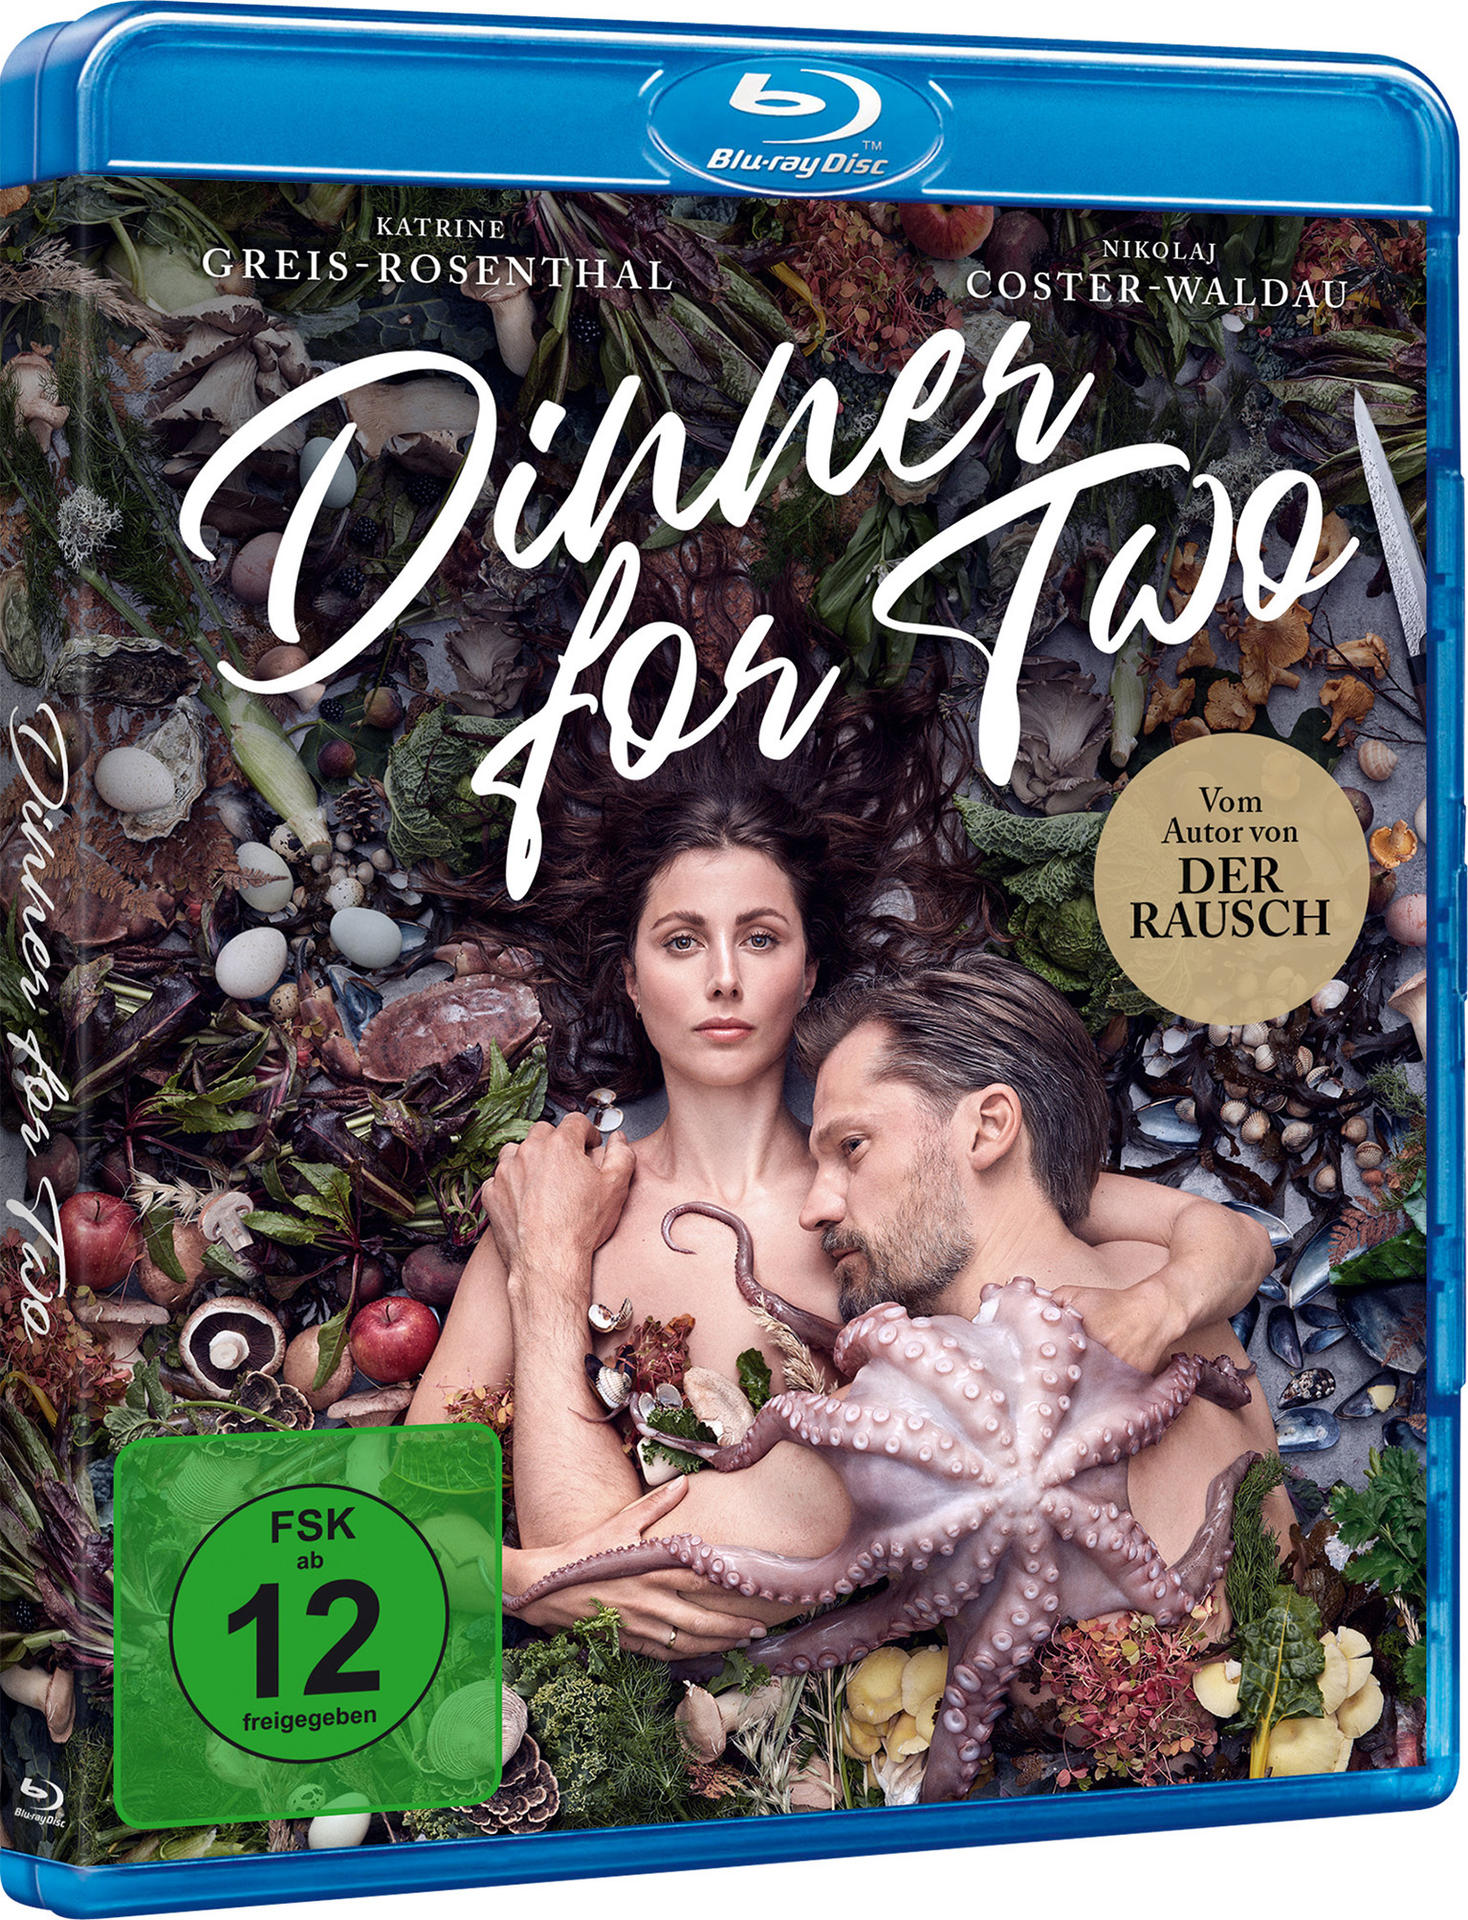 Dinner for Two Blu-ray